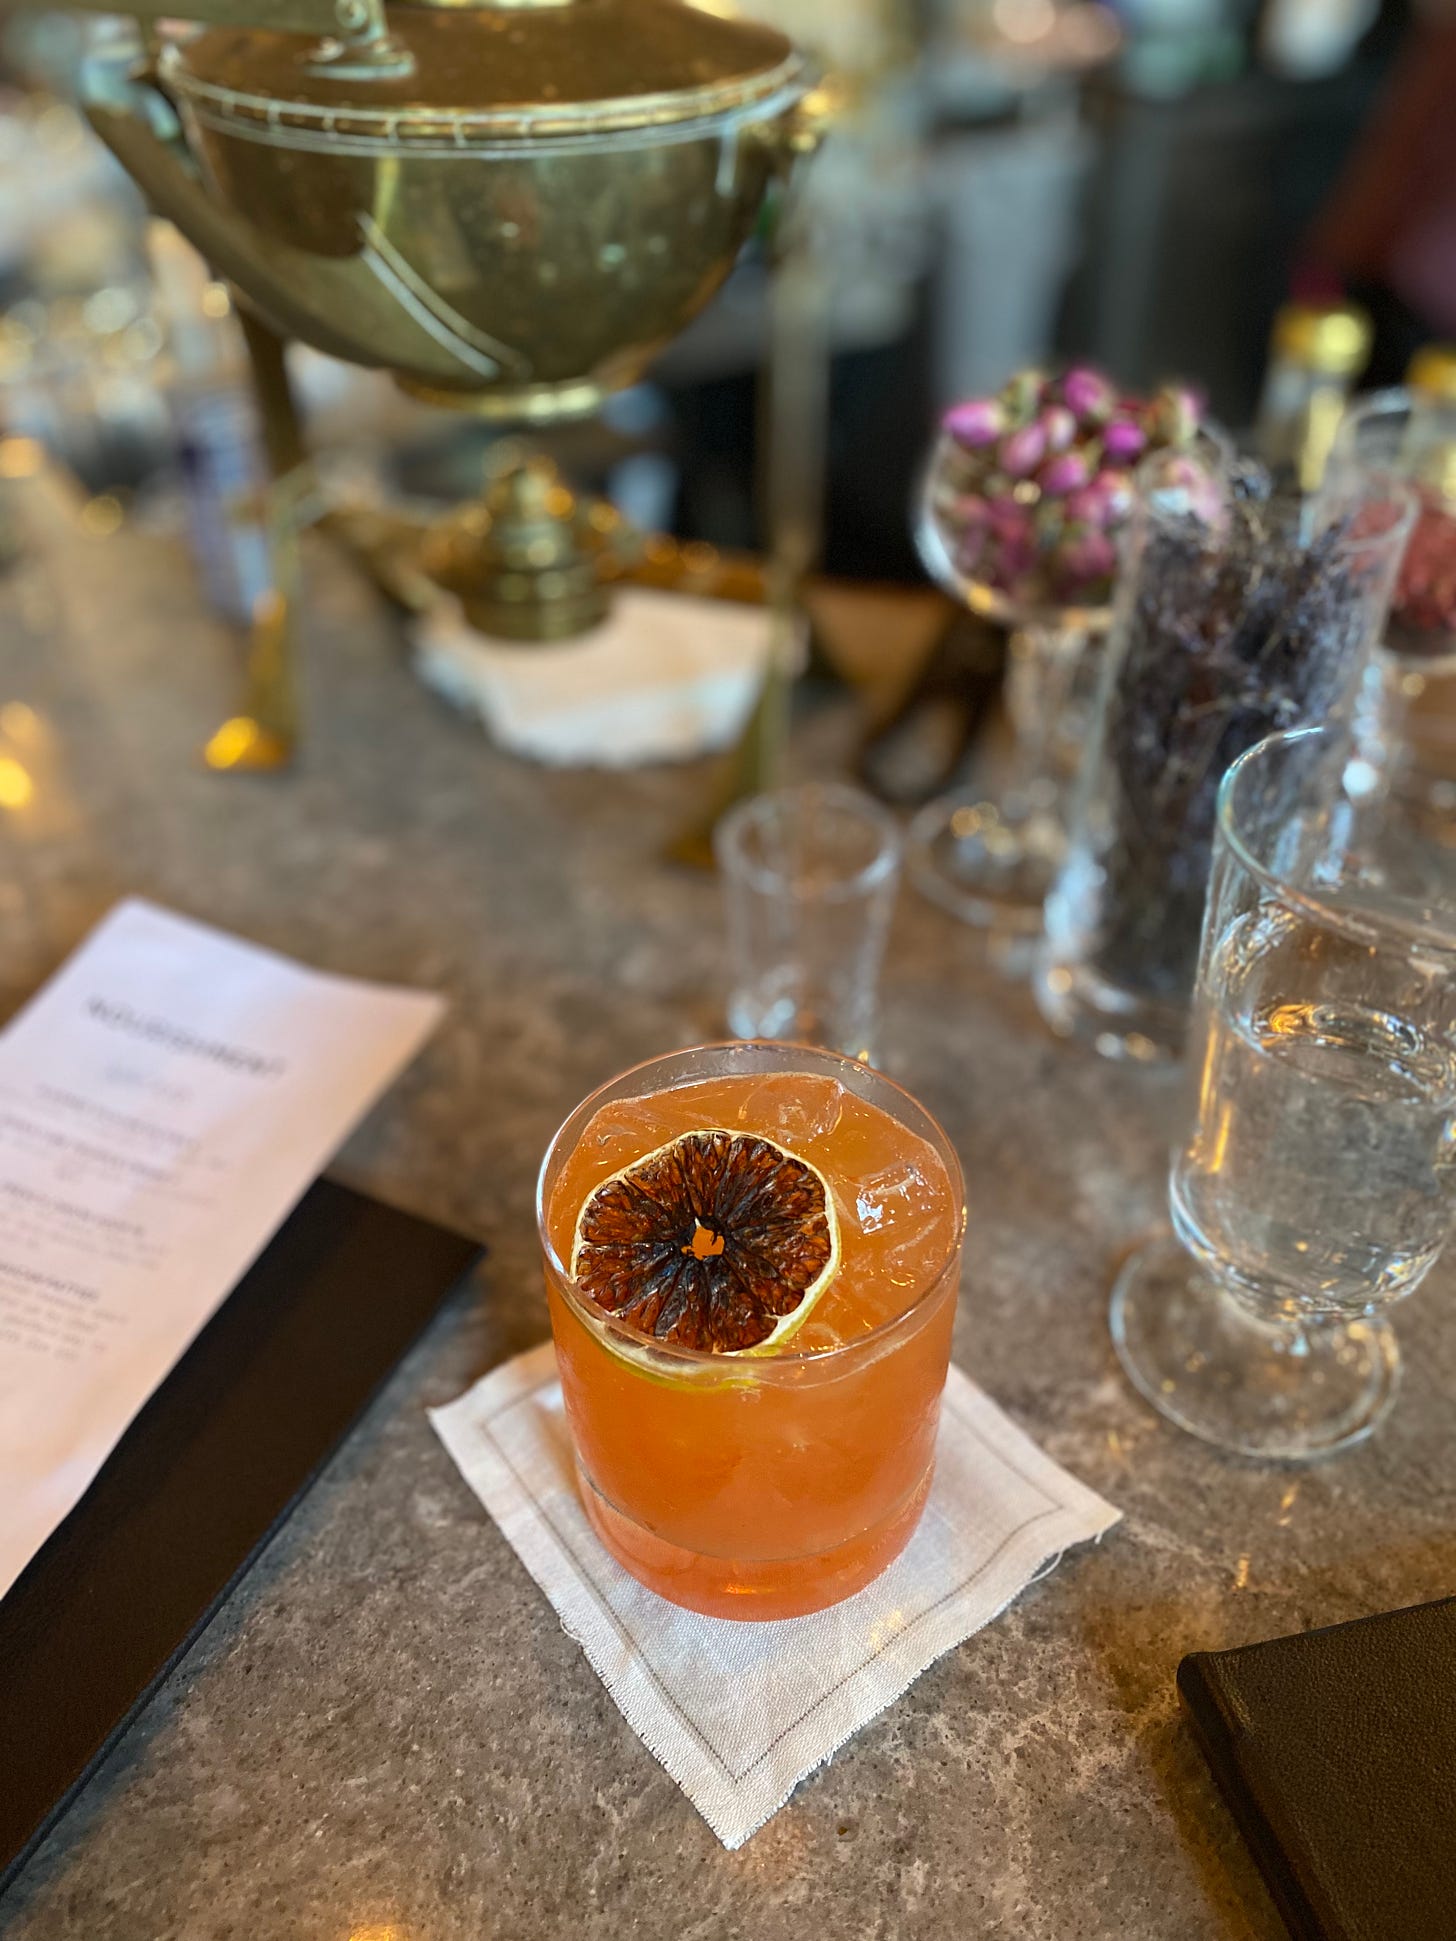 A cocktail with a dried orange slice in a highball glass, on a white napkin. There are other glasses nearby, including some filled with floral garnishes. On the left of the drink is a menu, and in the background is a small antique brass still.